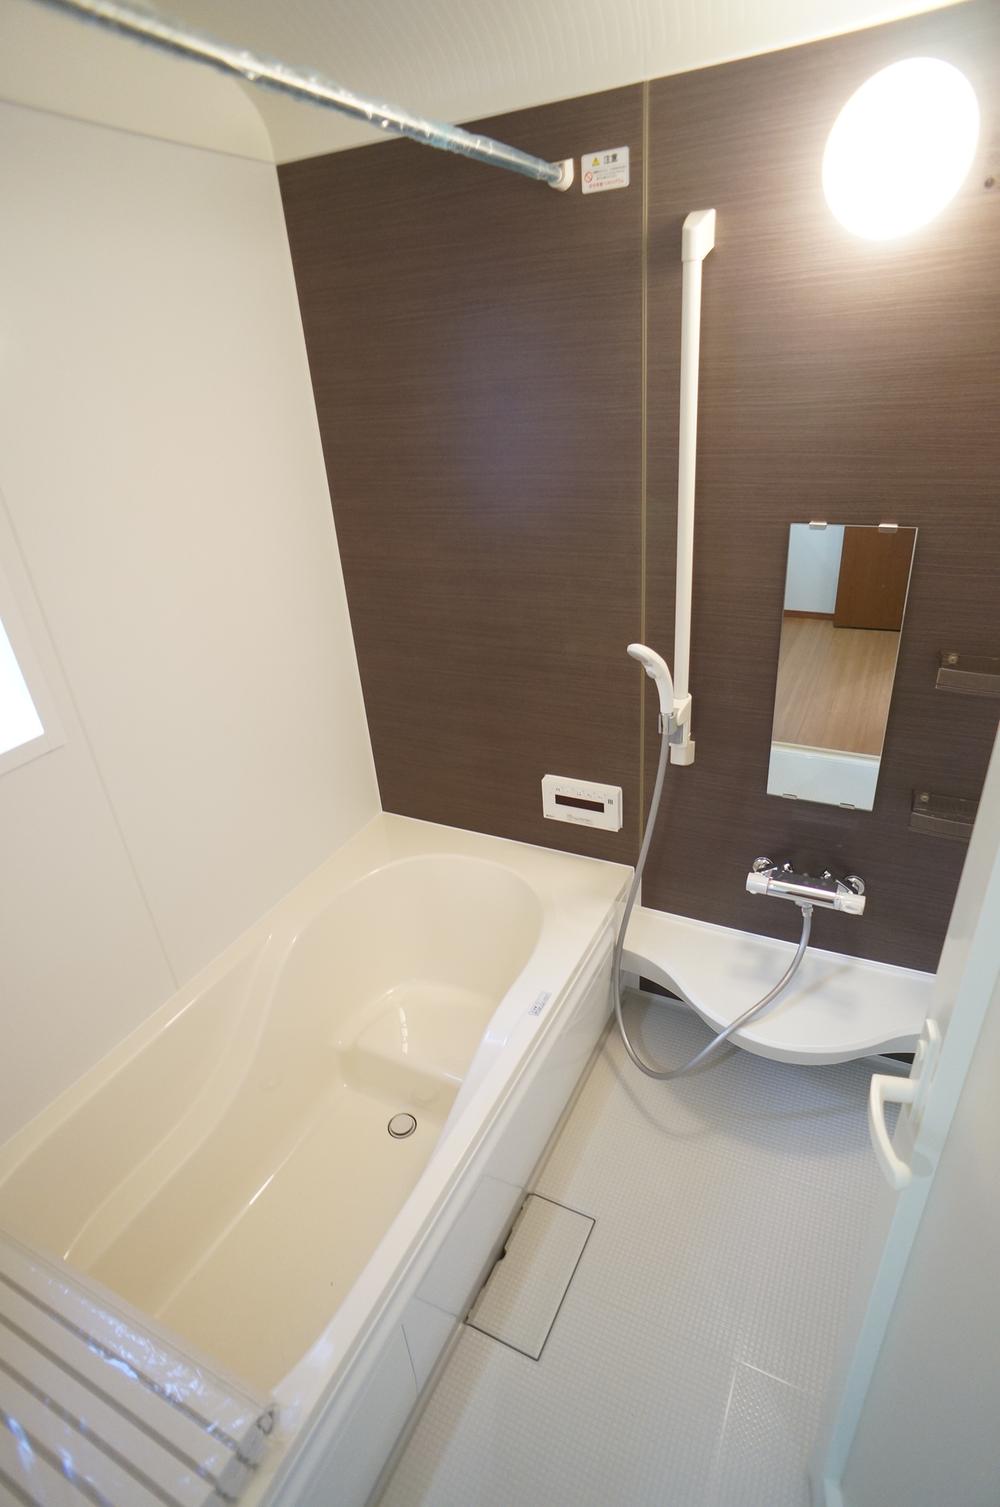 Same specifications photo (bathroom). It is the example of construction of the same construction company.  It is different from the actual photo. 